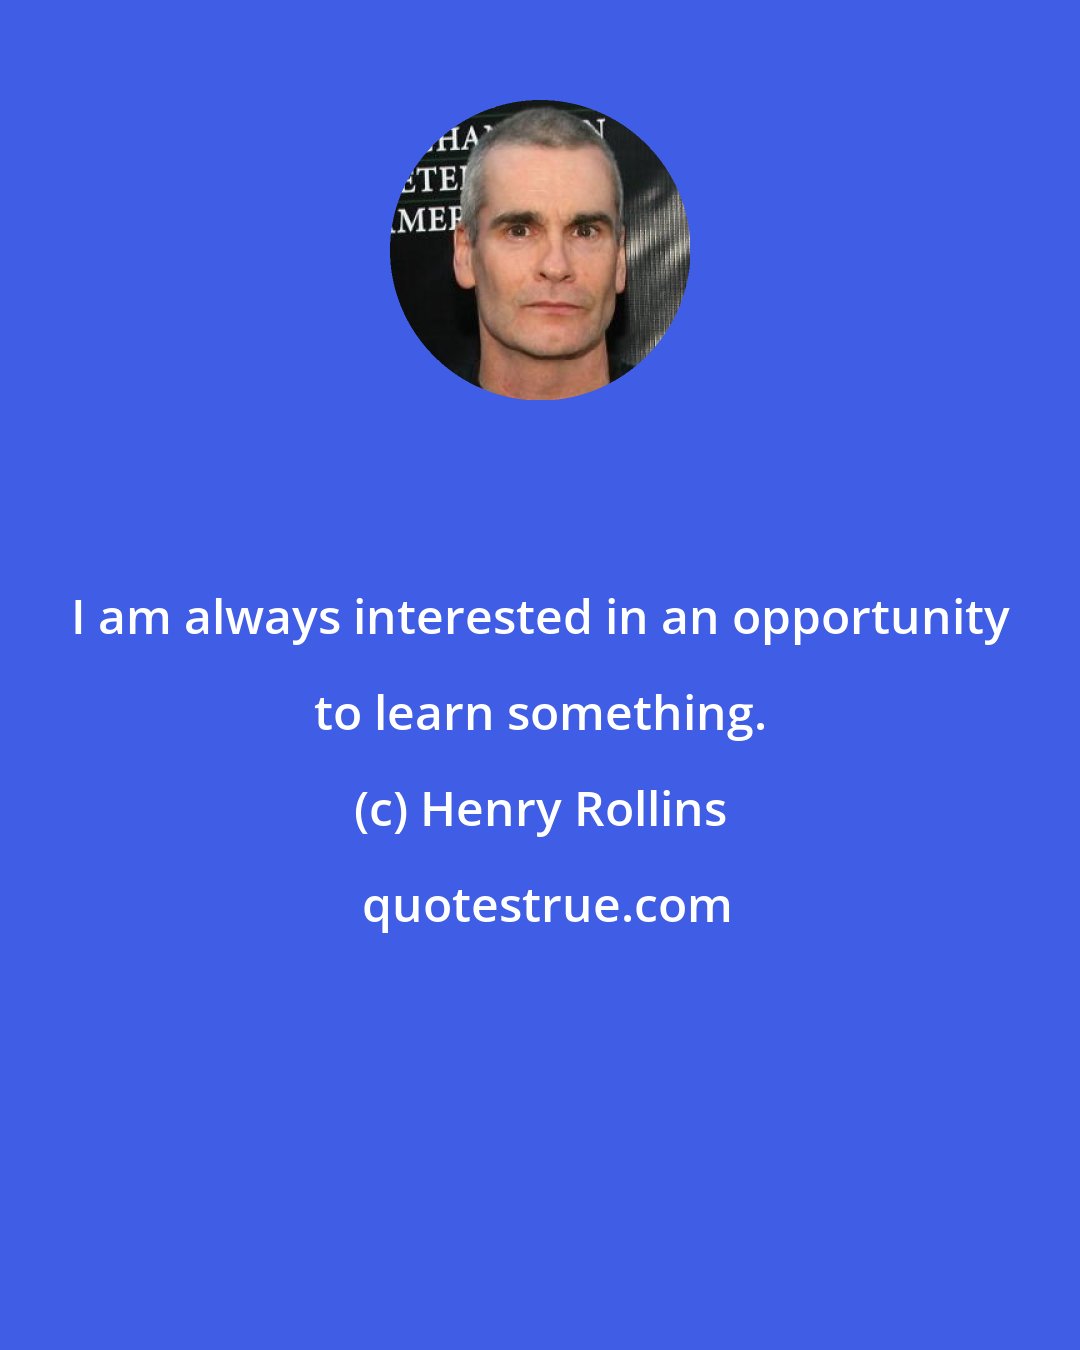 Henry Rollins: I am always interested in an opportunity to learn something.